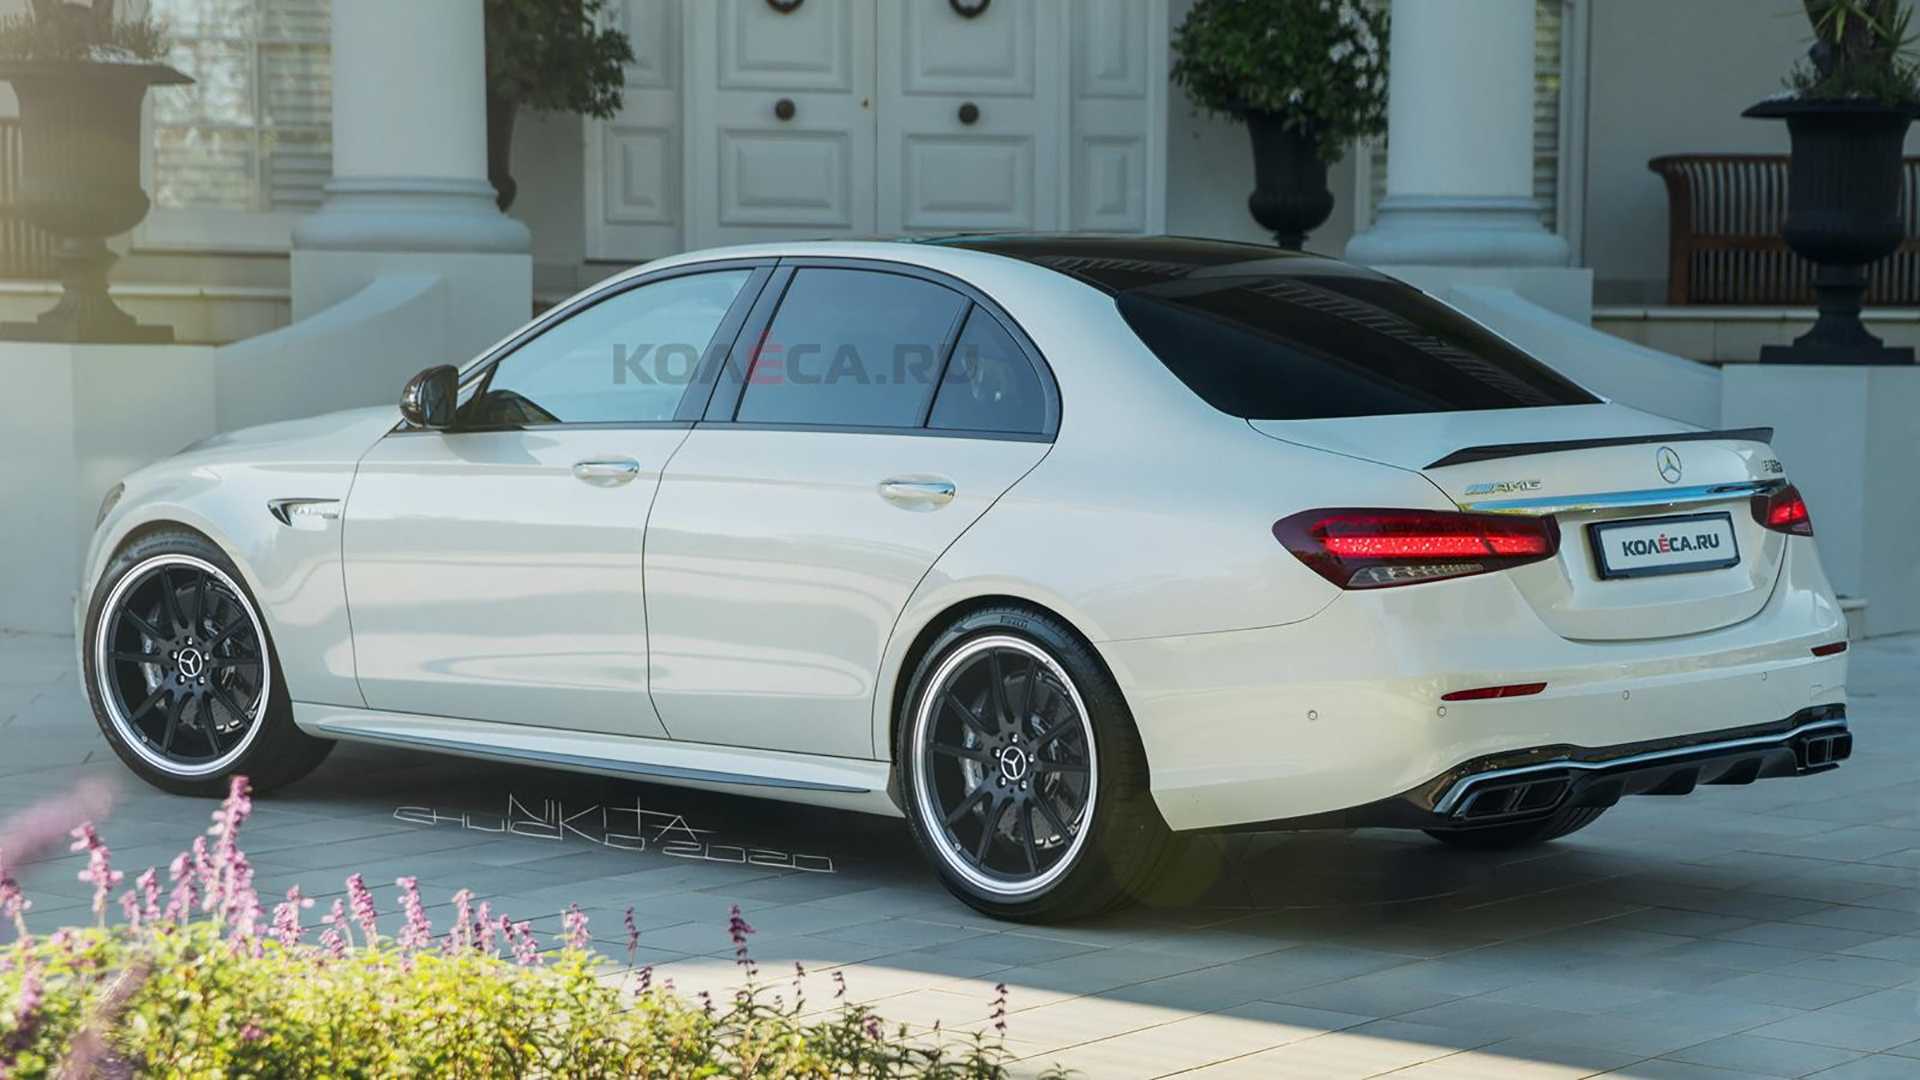 Mercedes AMG E63 Leaked Image Lead To Realistic Rendering